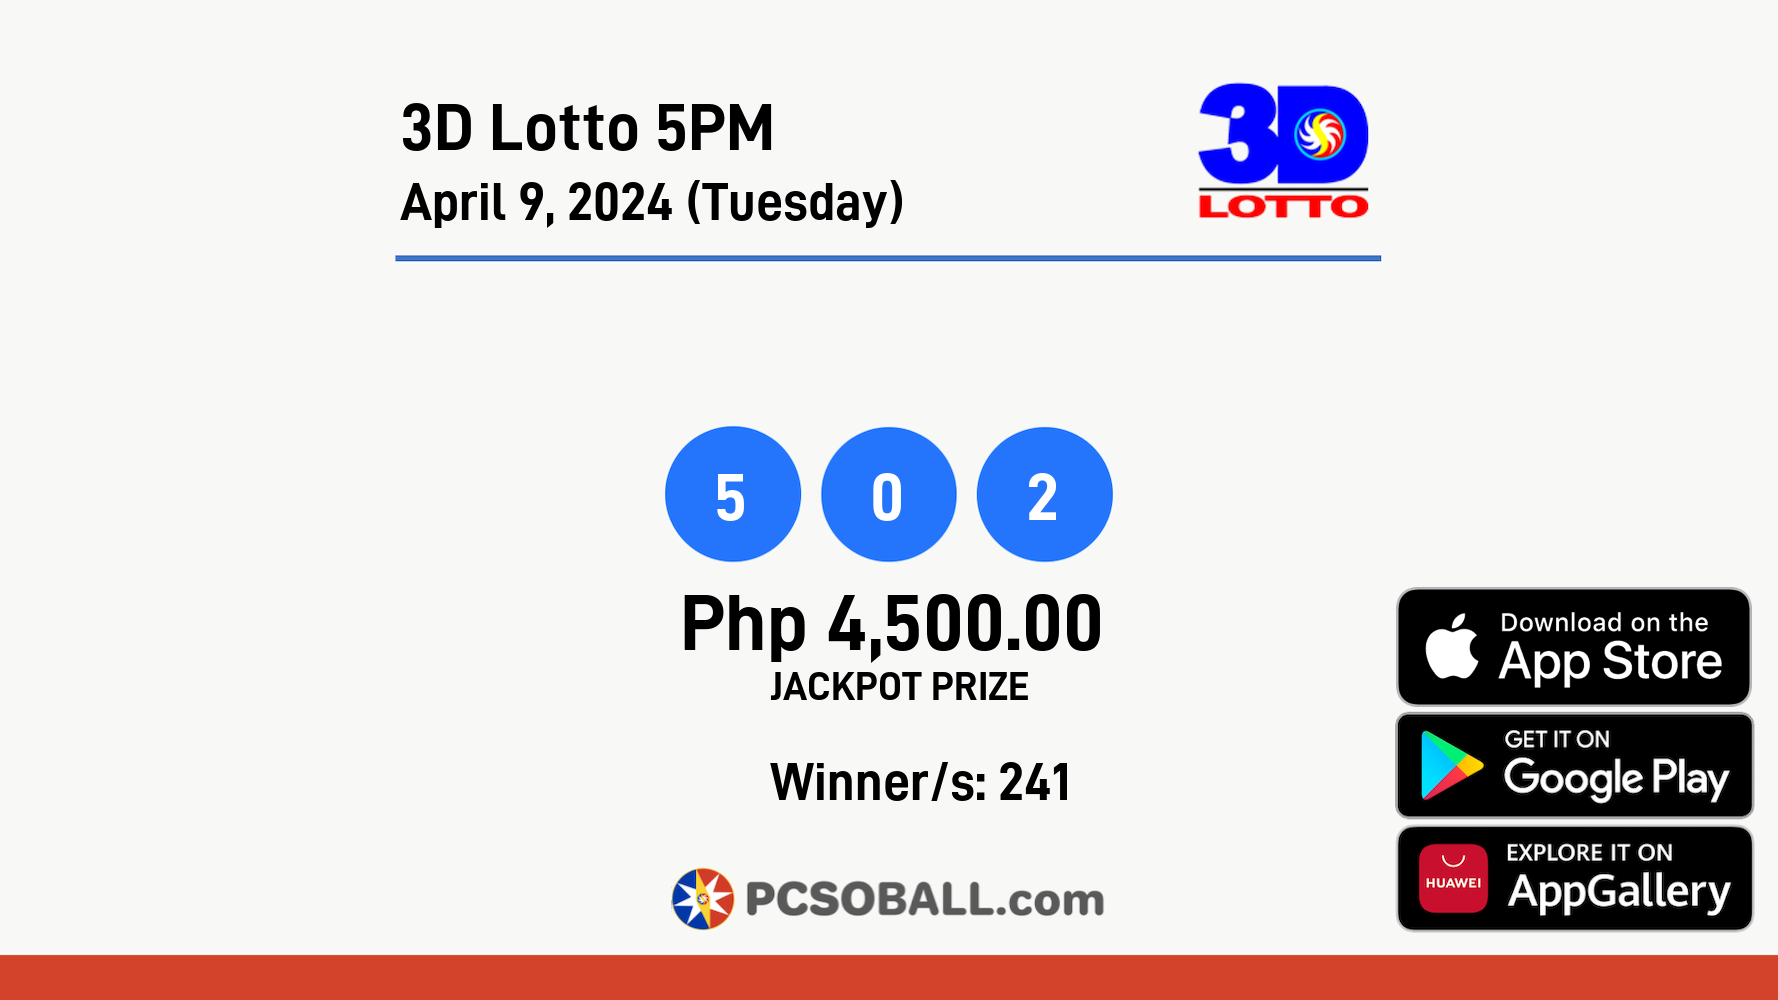 3D Lotto 5PM April 9, 2024 (Tuesday) Result